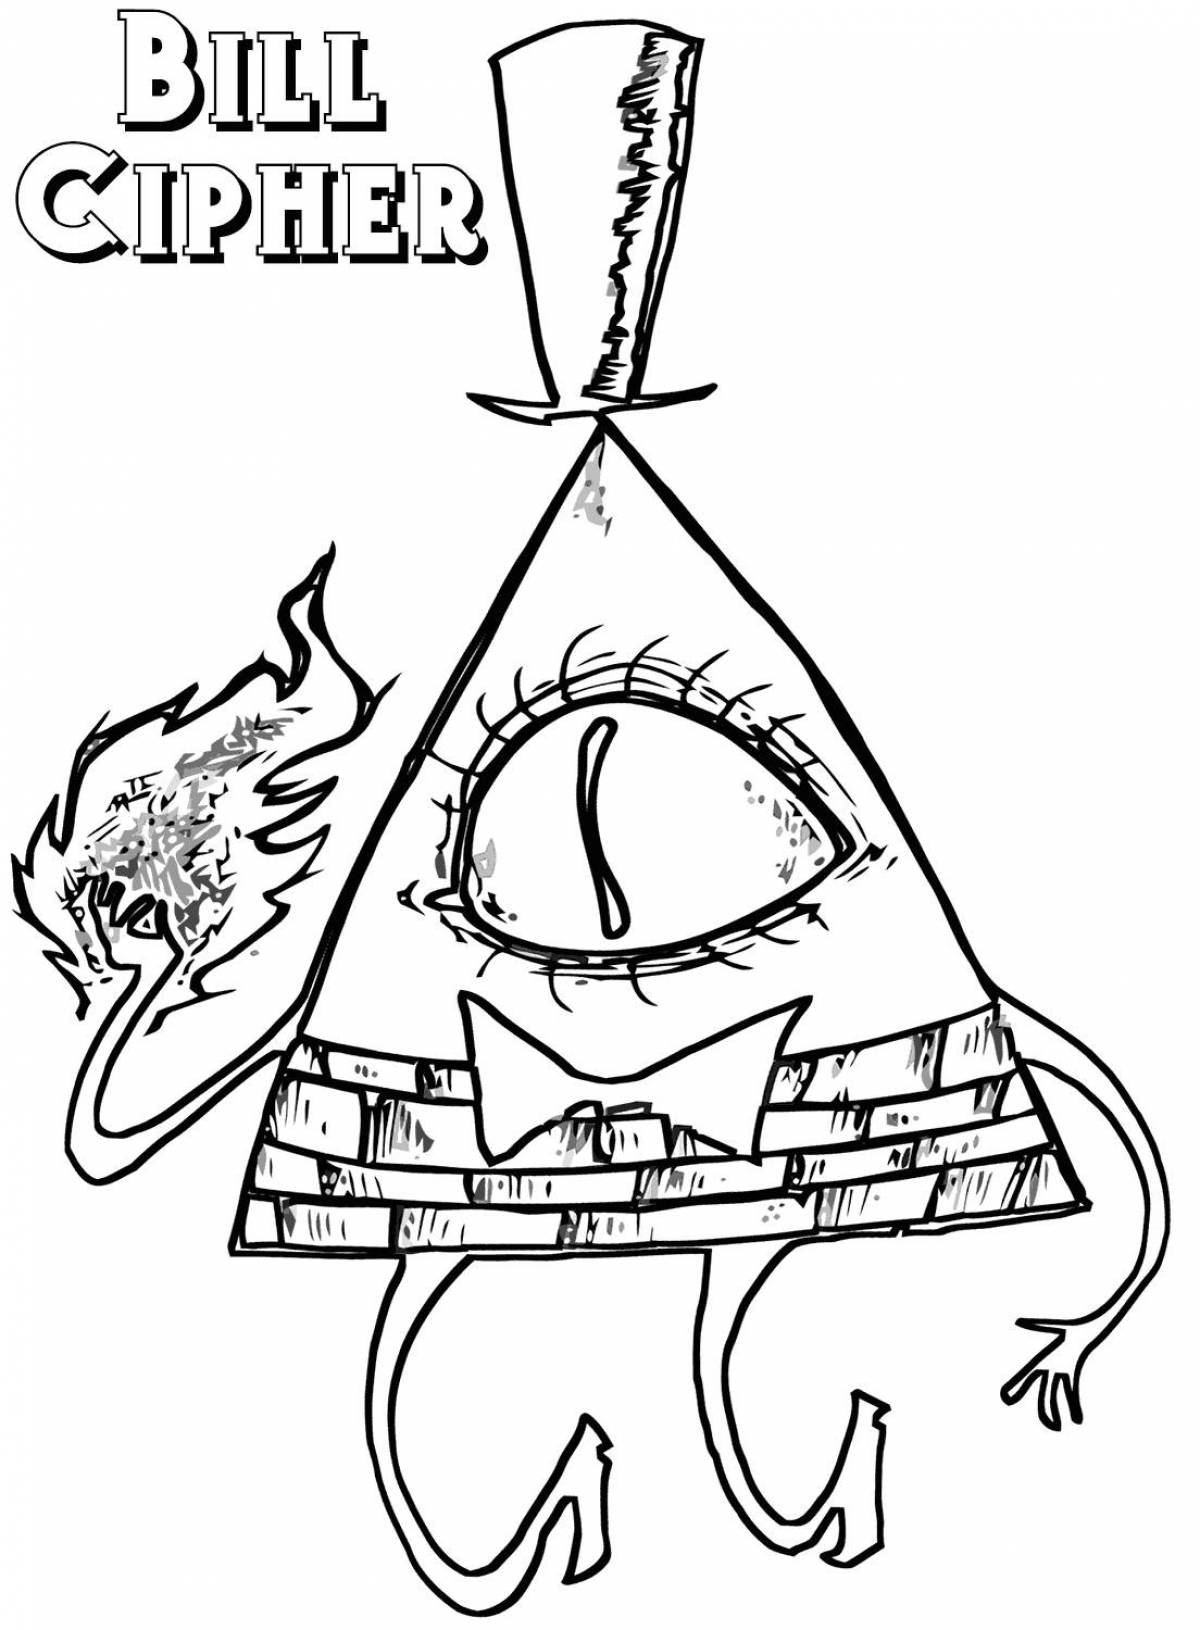 Coloring book hypnotic bill cipher